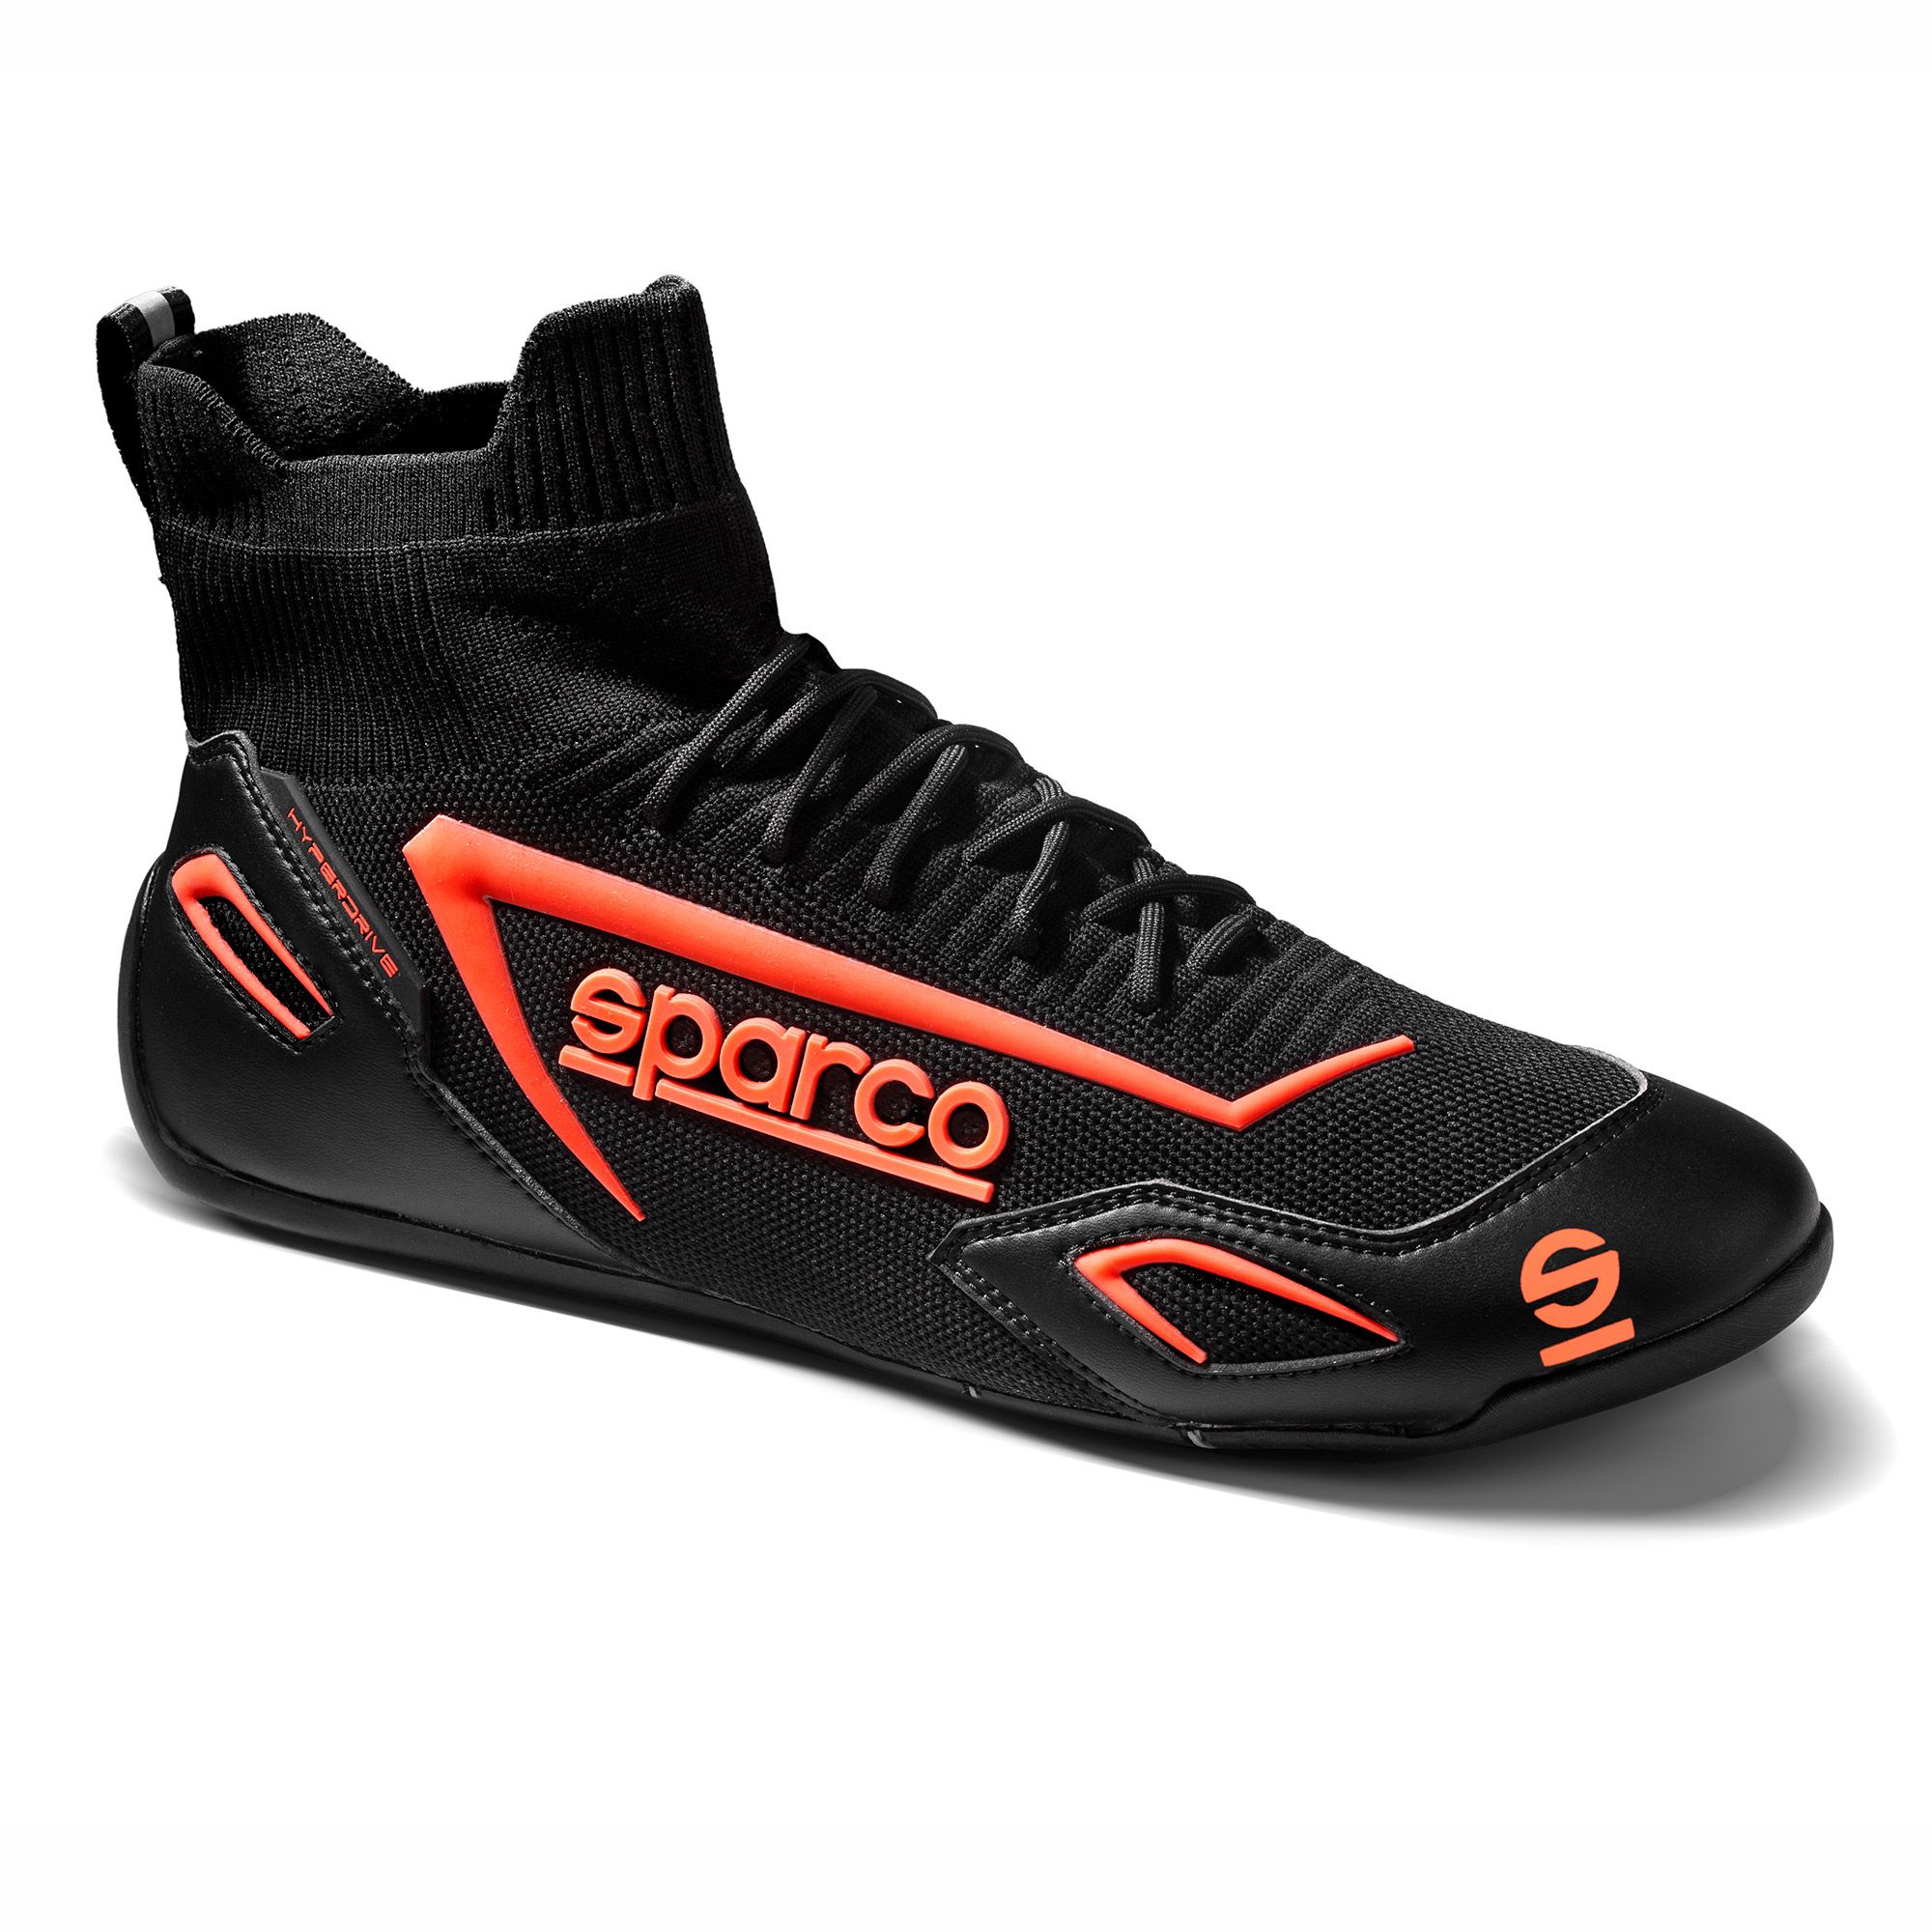 SPARCO 00129346NRRS Gaming sim racing shoes HYPERDRIVE, black/red, size 46 Photo-0 